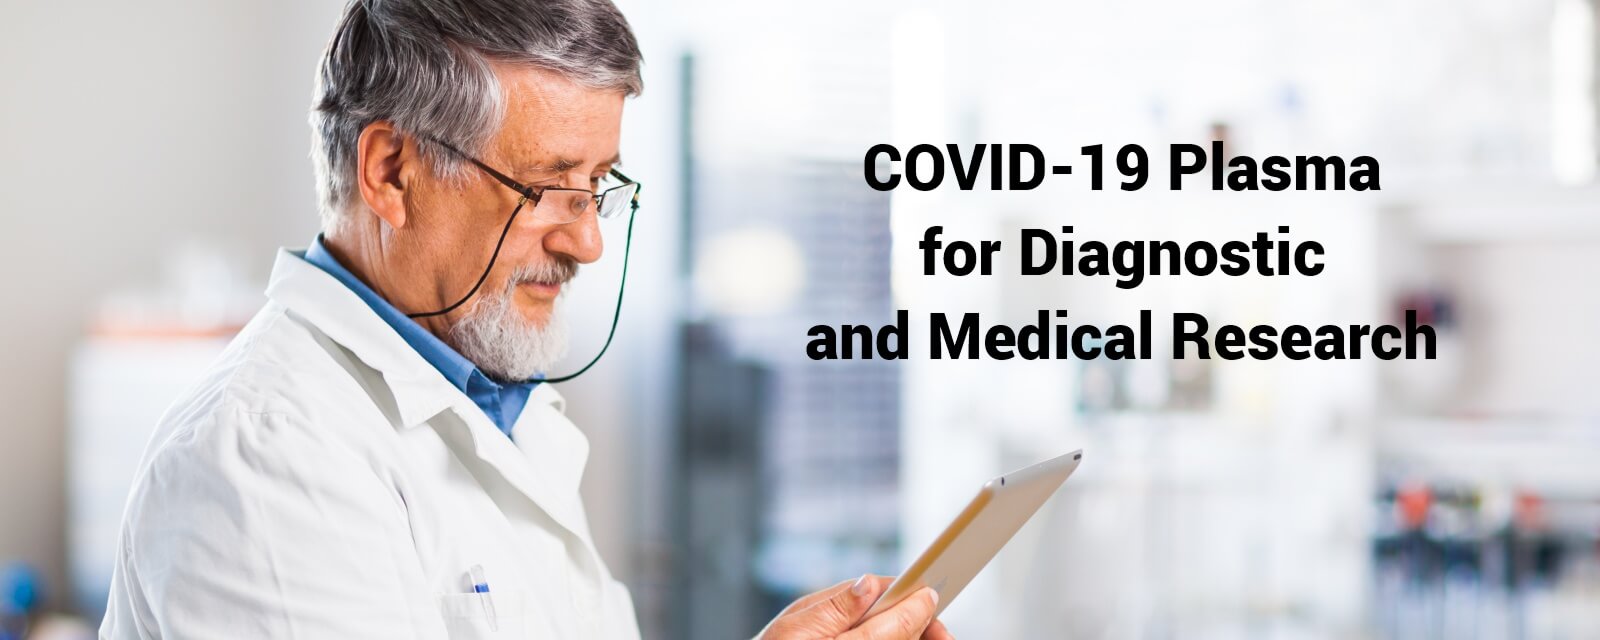 Medical researcher studying COVID-19 plasma results